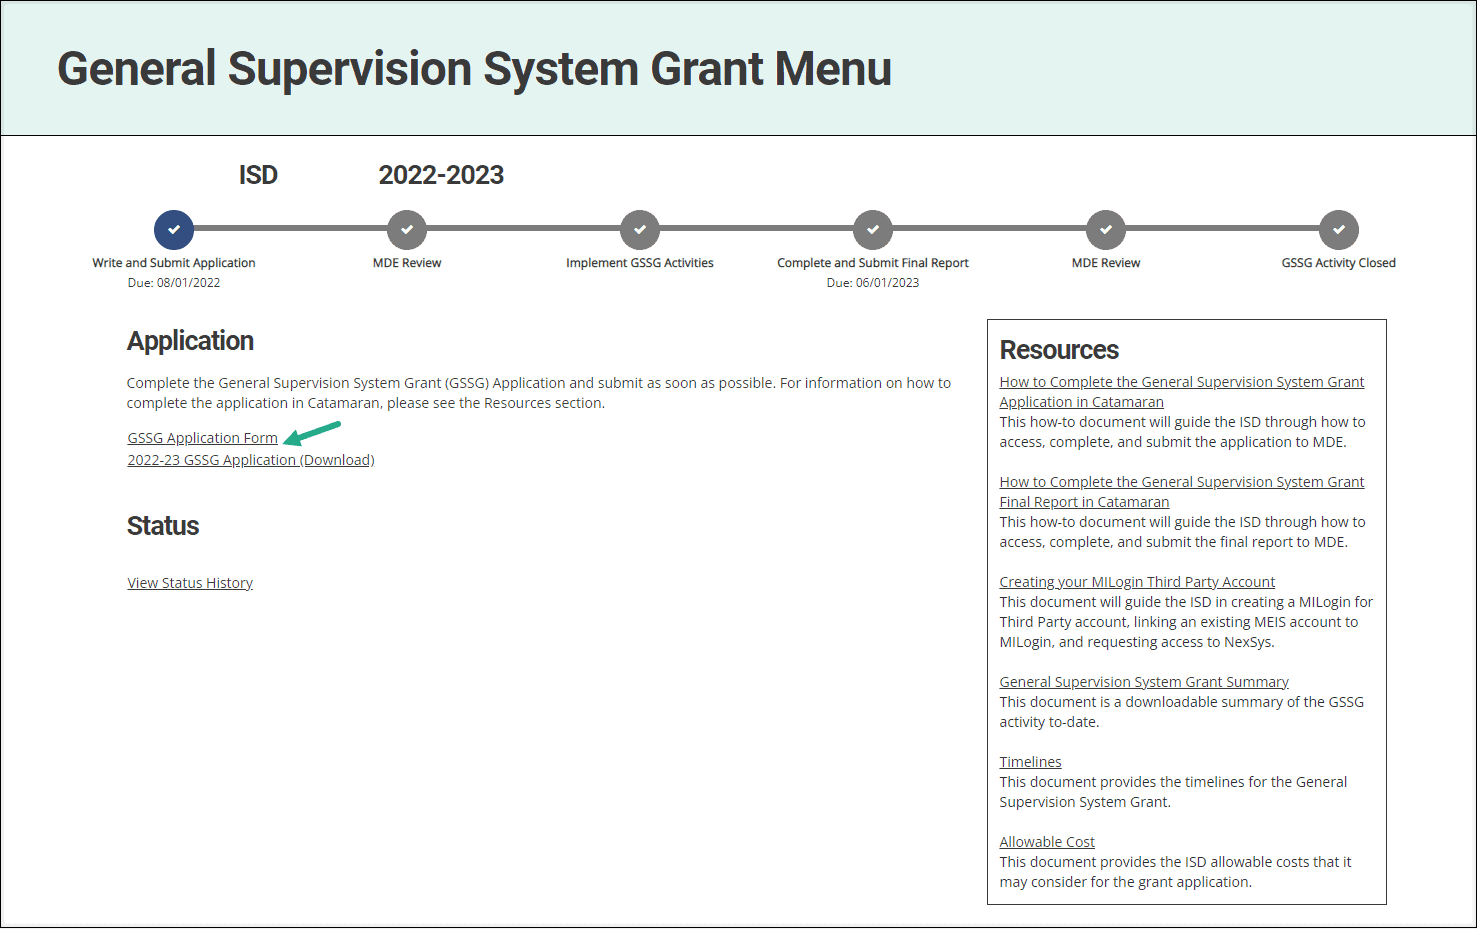 General Supervision System Grant Application Menu showing the application form.